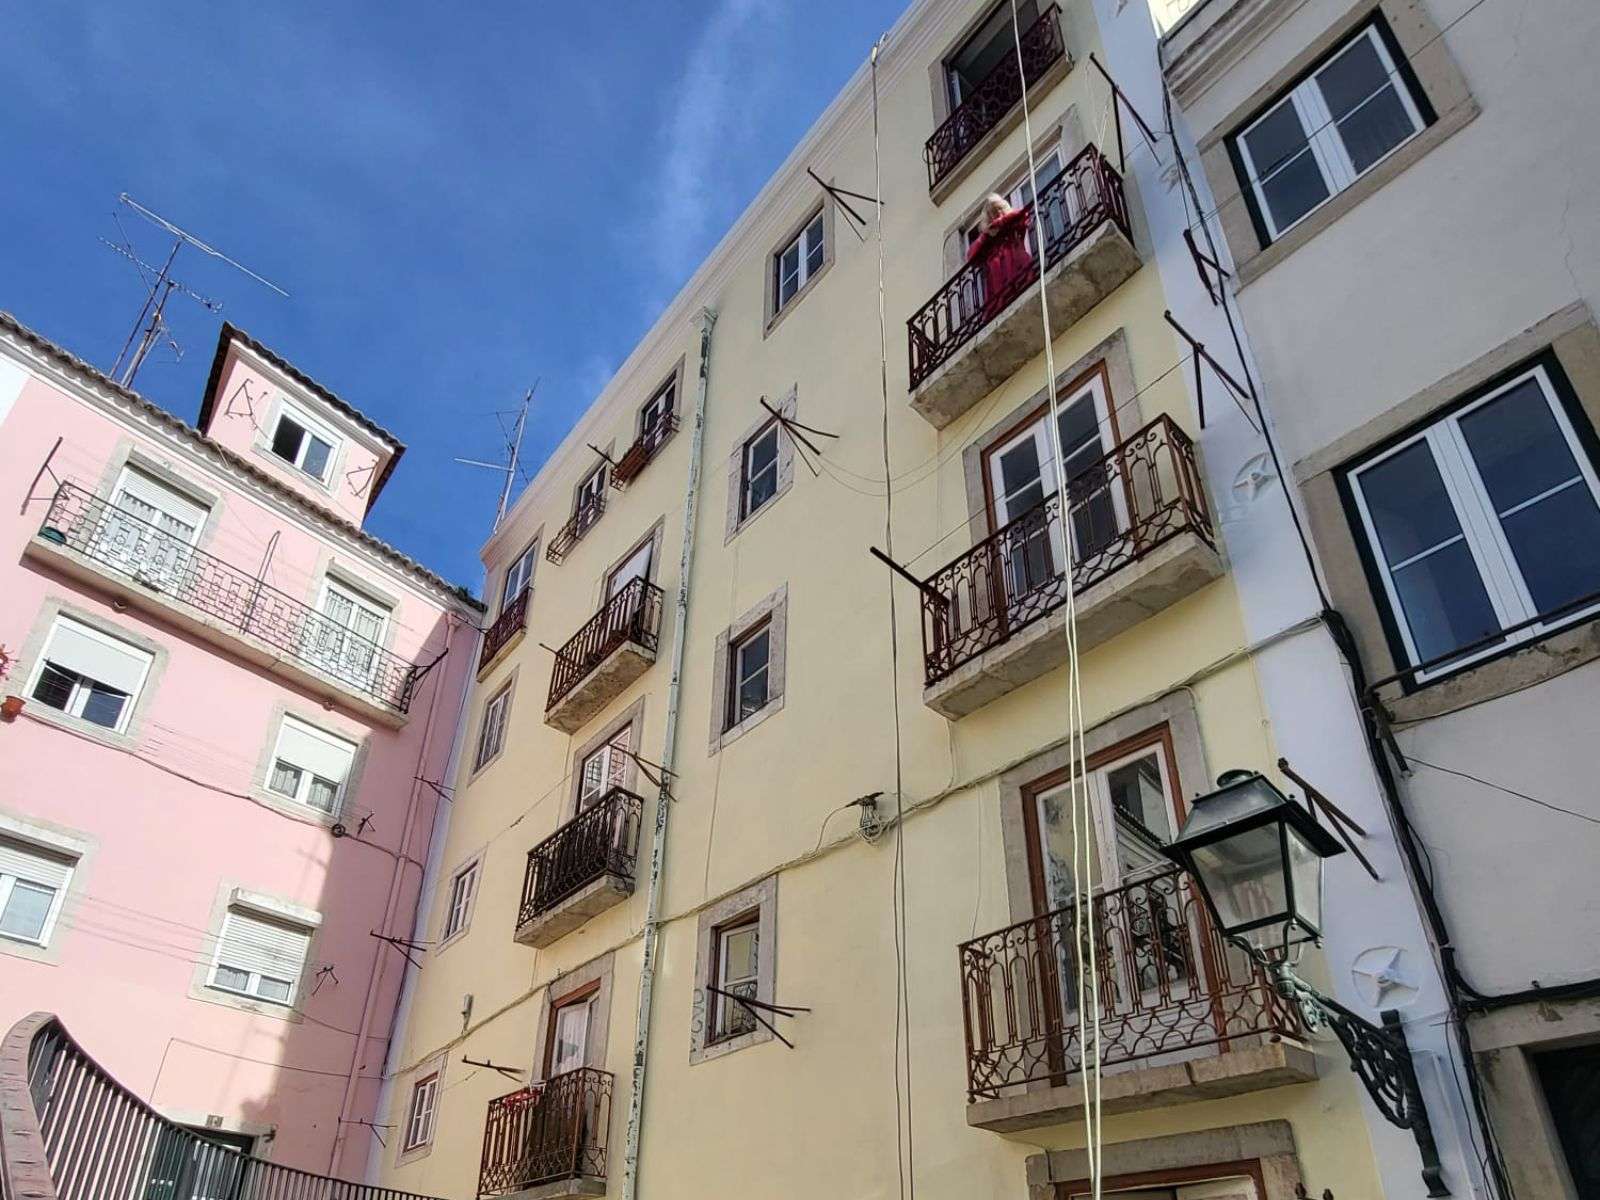 Studio apartment with 30 sqm total area, for sale, in Bica, Lisboa